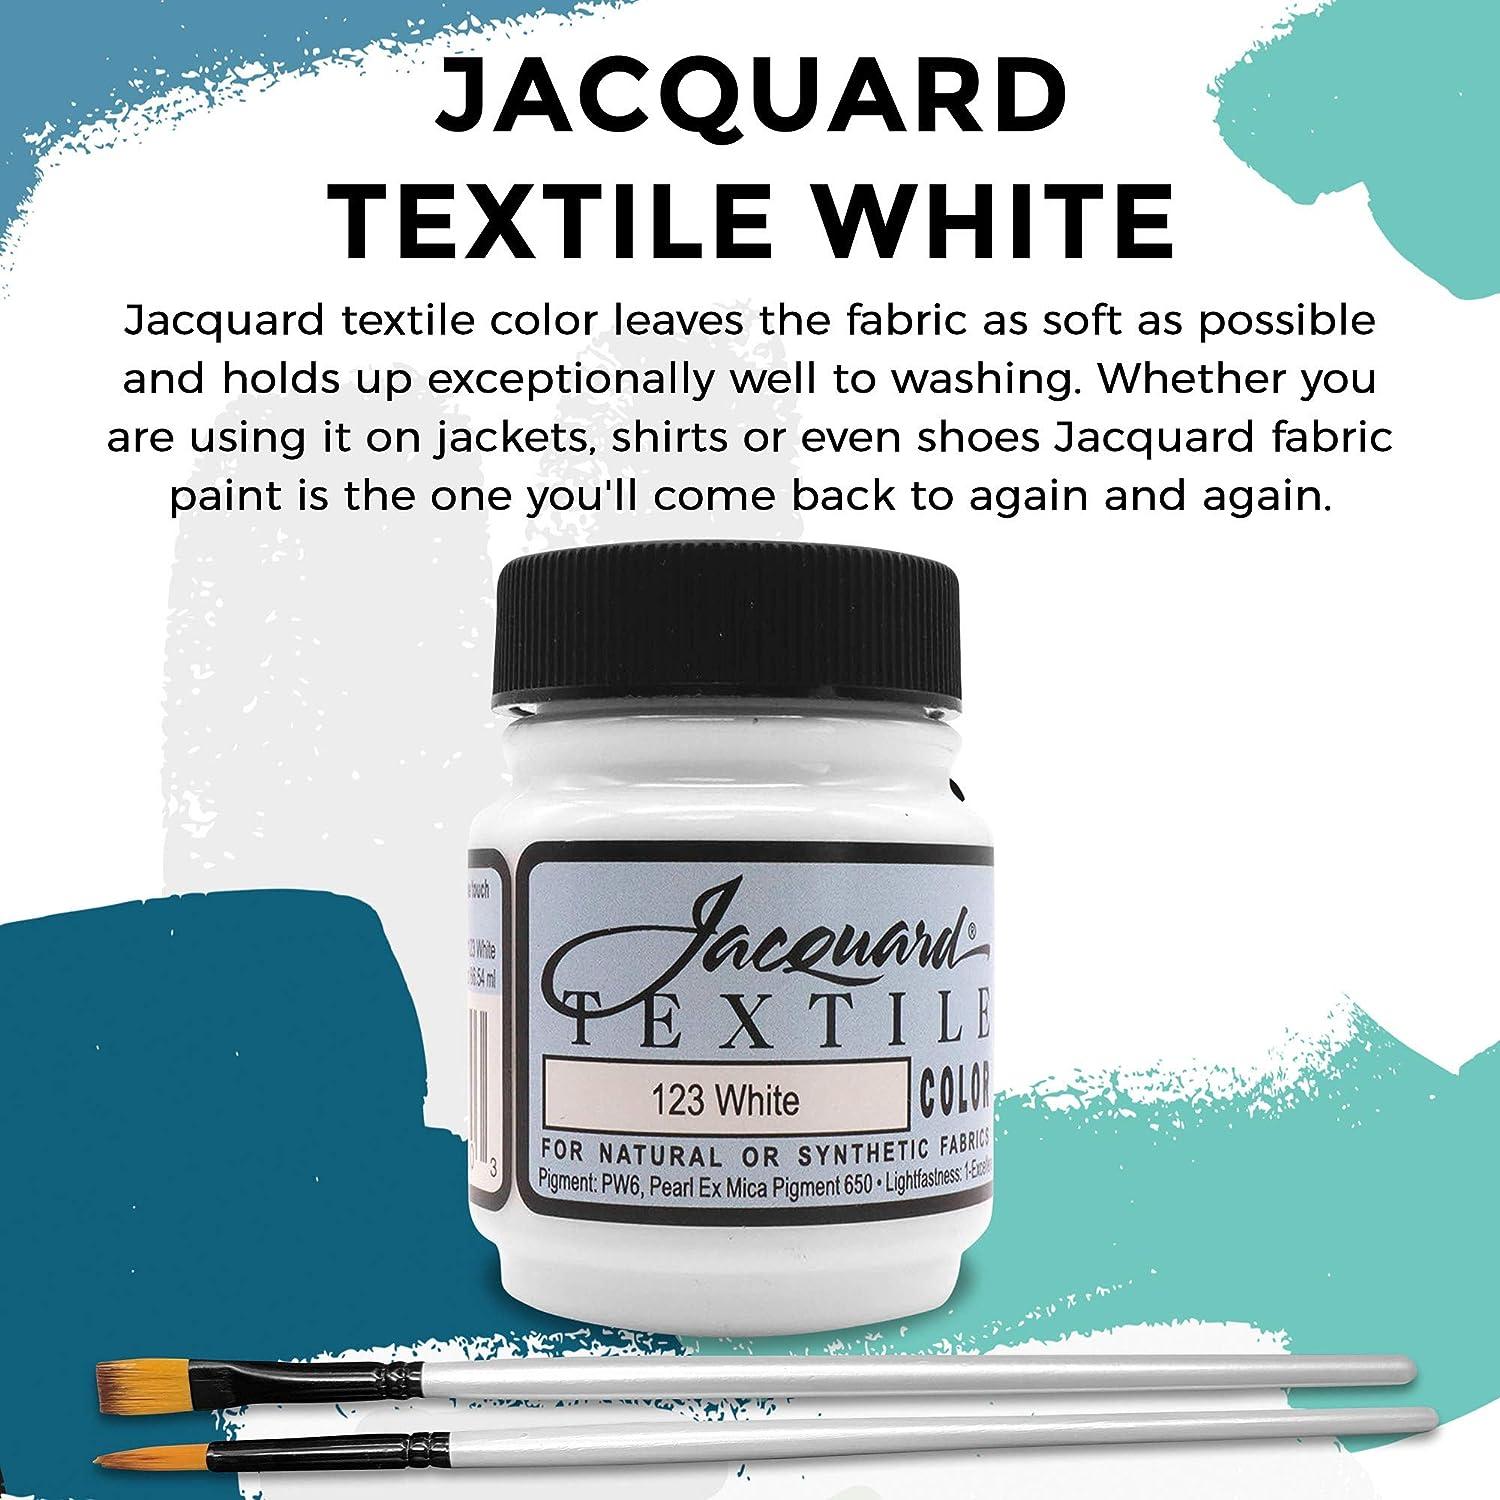 Moshify Jacquard Products White Textile Color Fabric Paint Made in USA -  JAC1123 2.25-Ounces - Bundled Brush Set 3 Piece Set